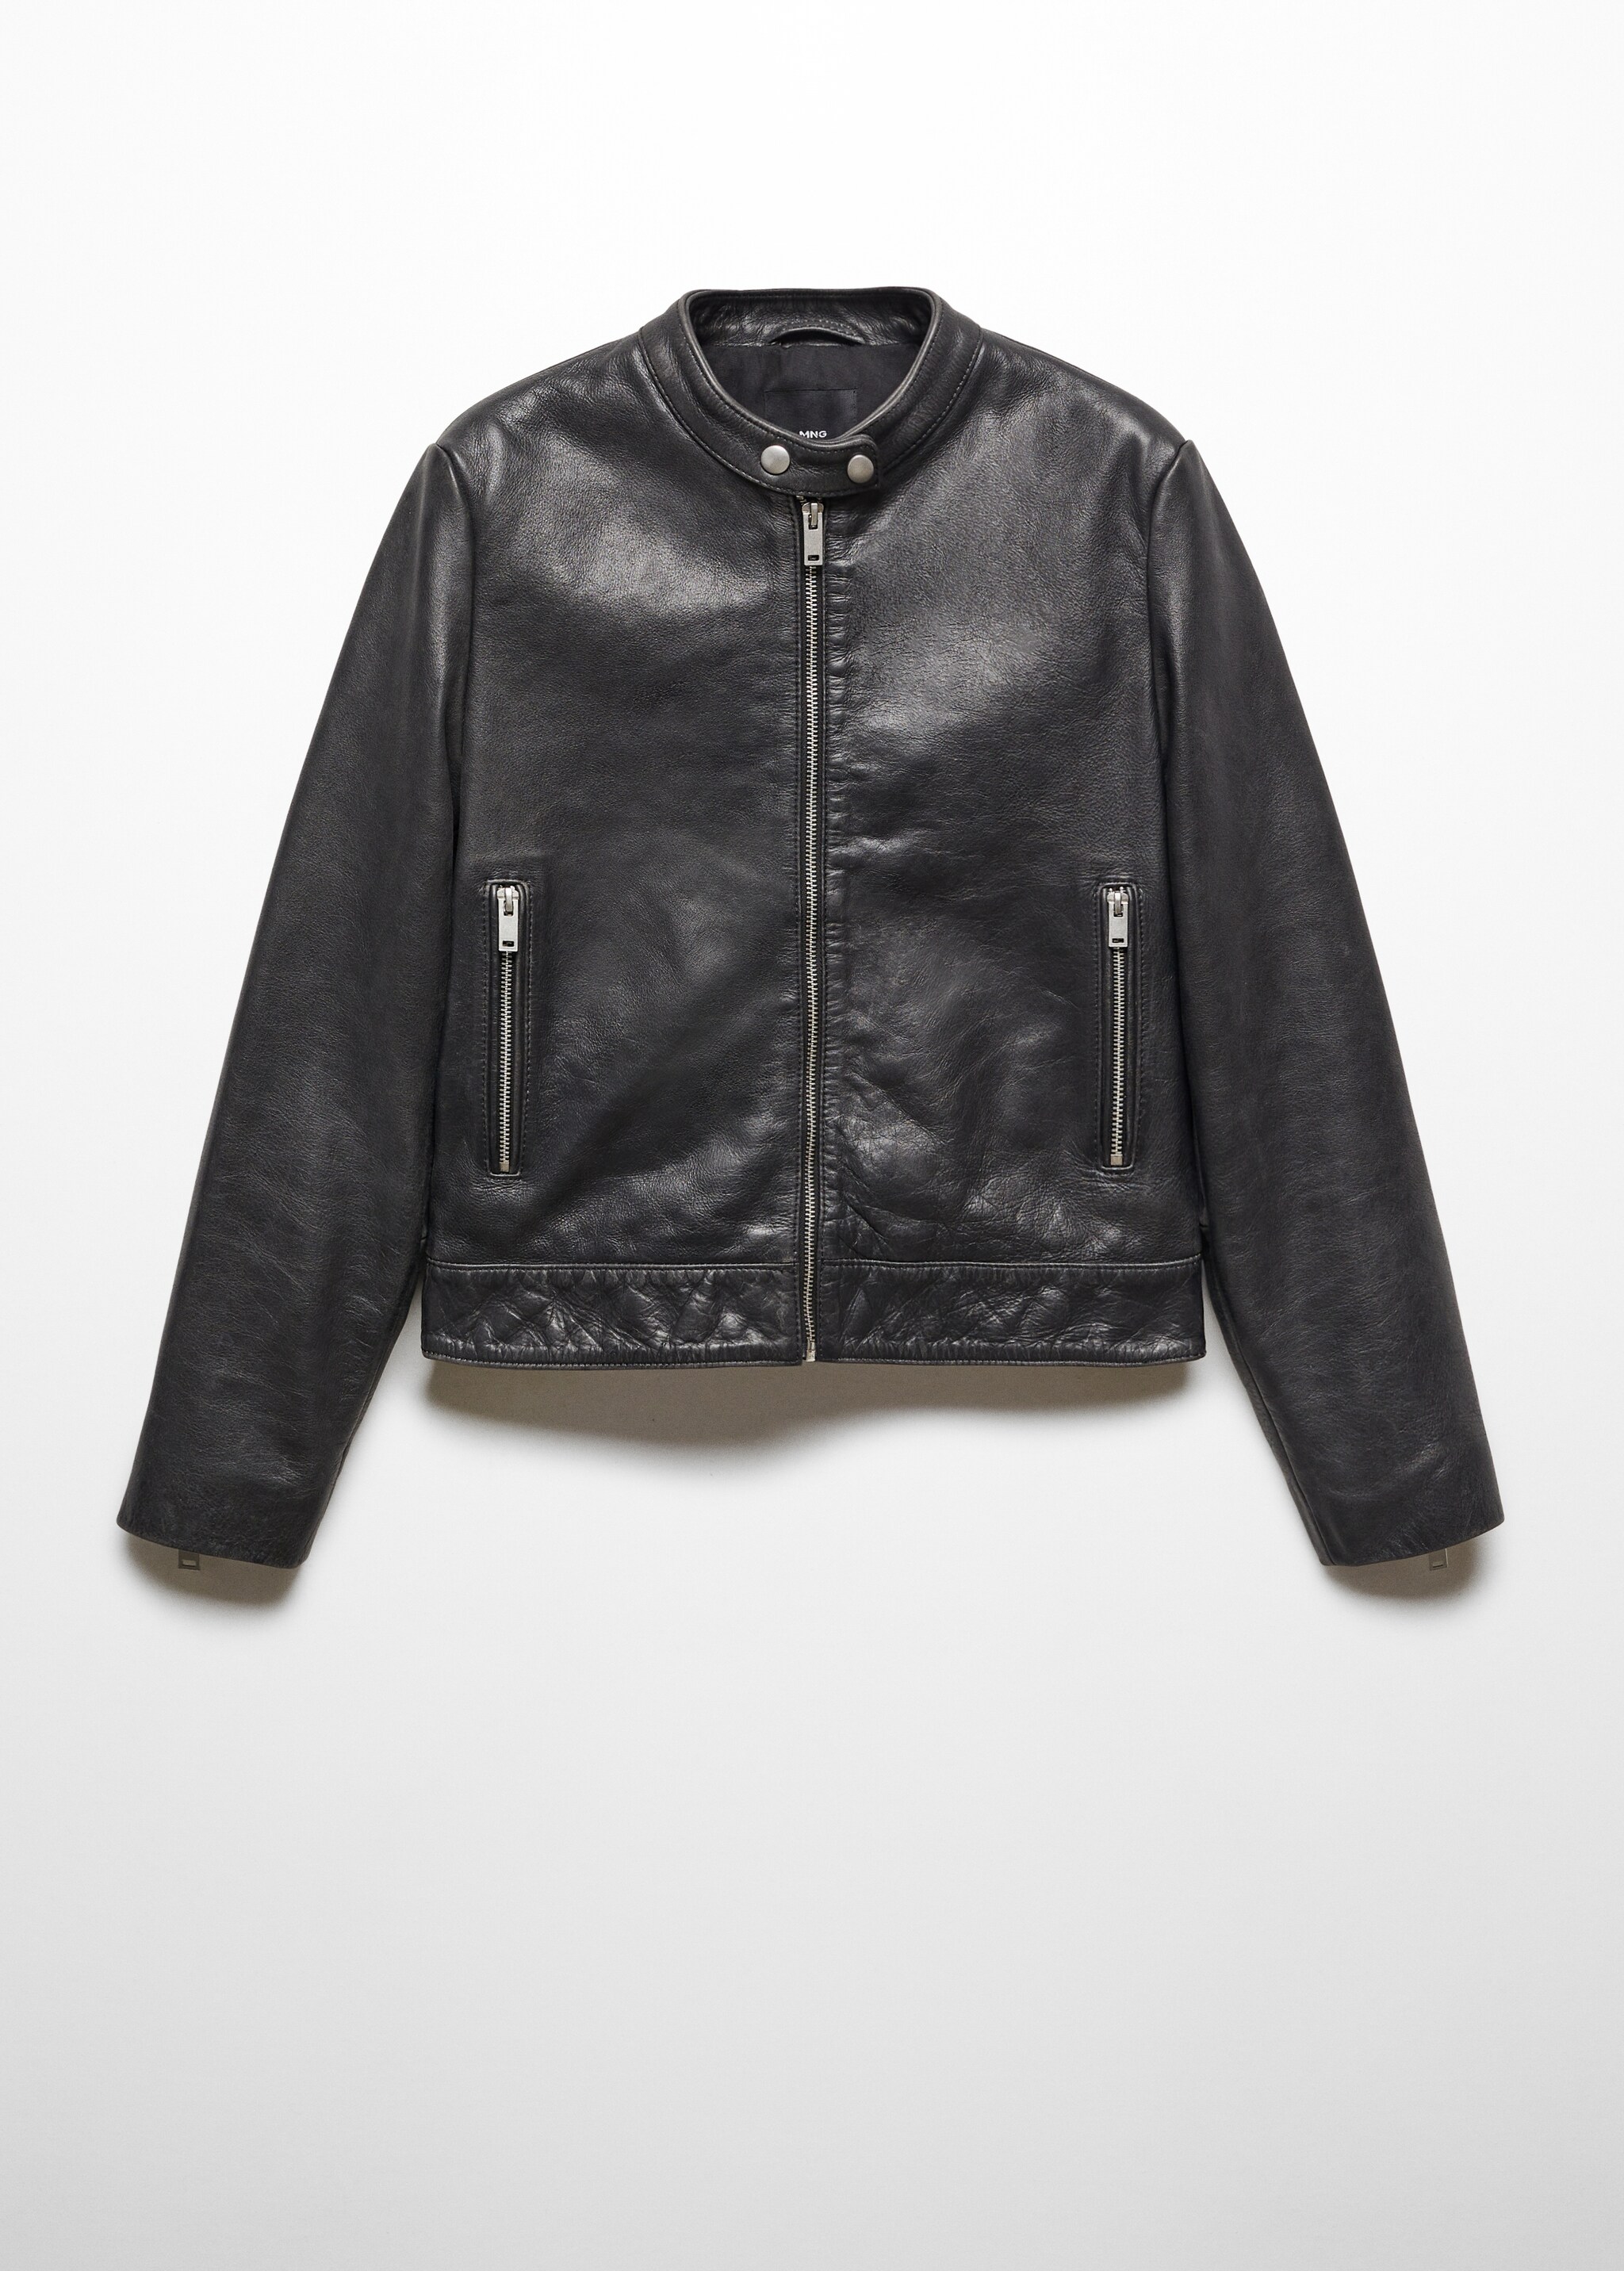 100% leather jacket - Article without model